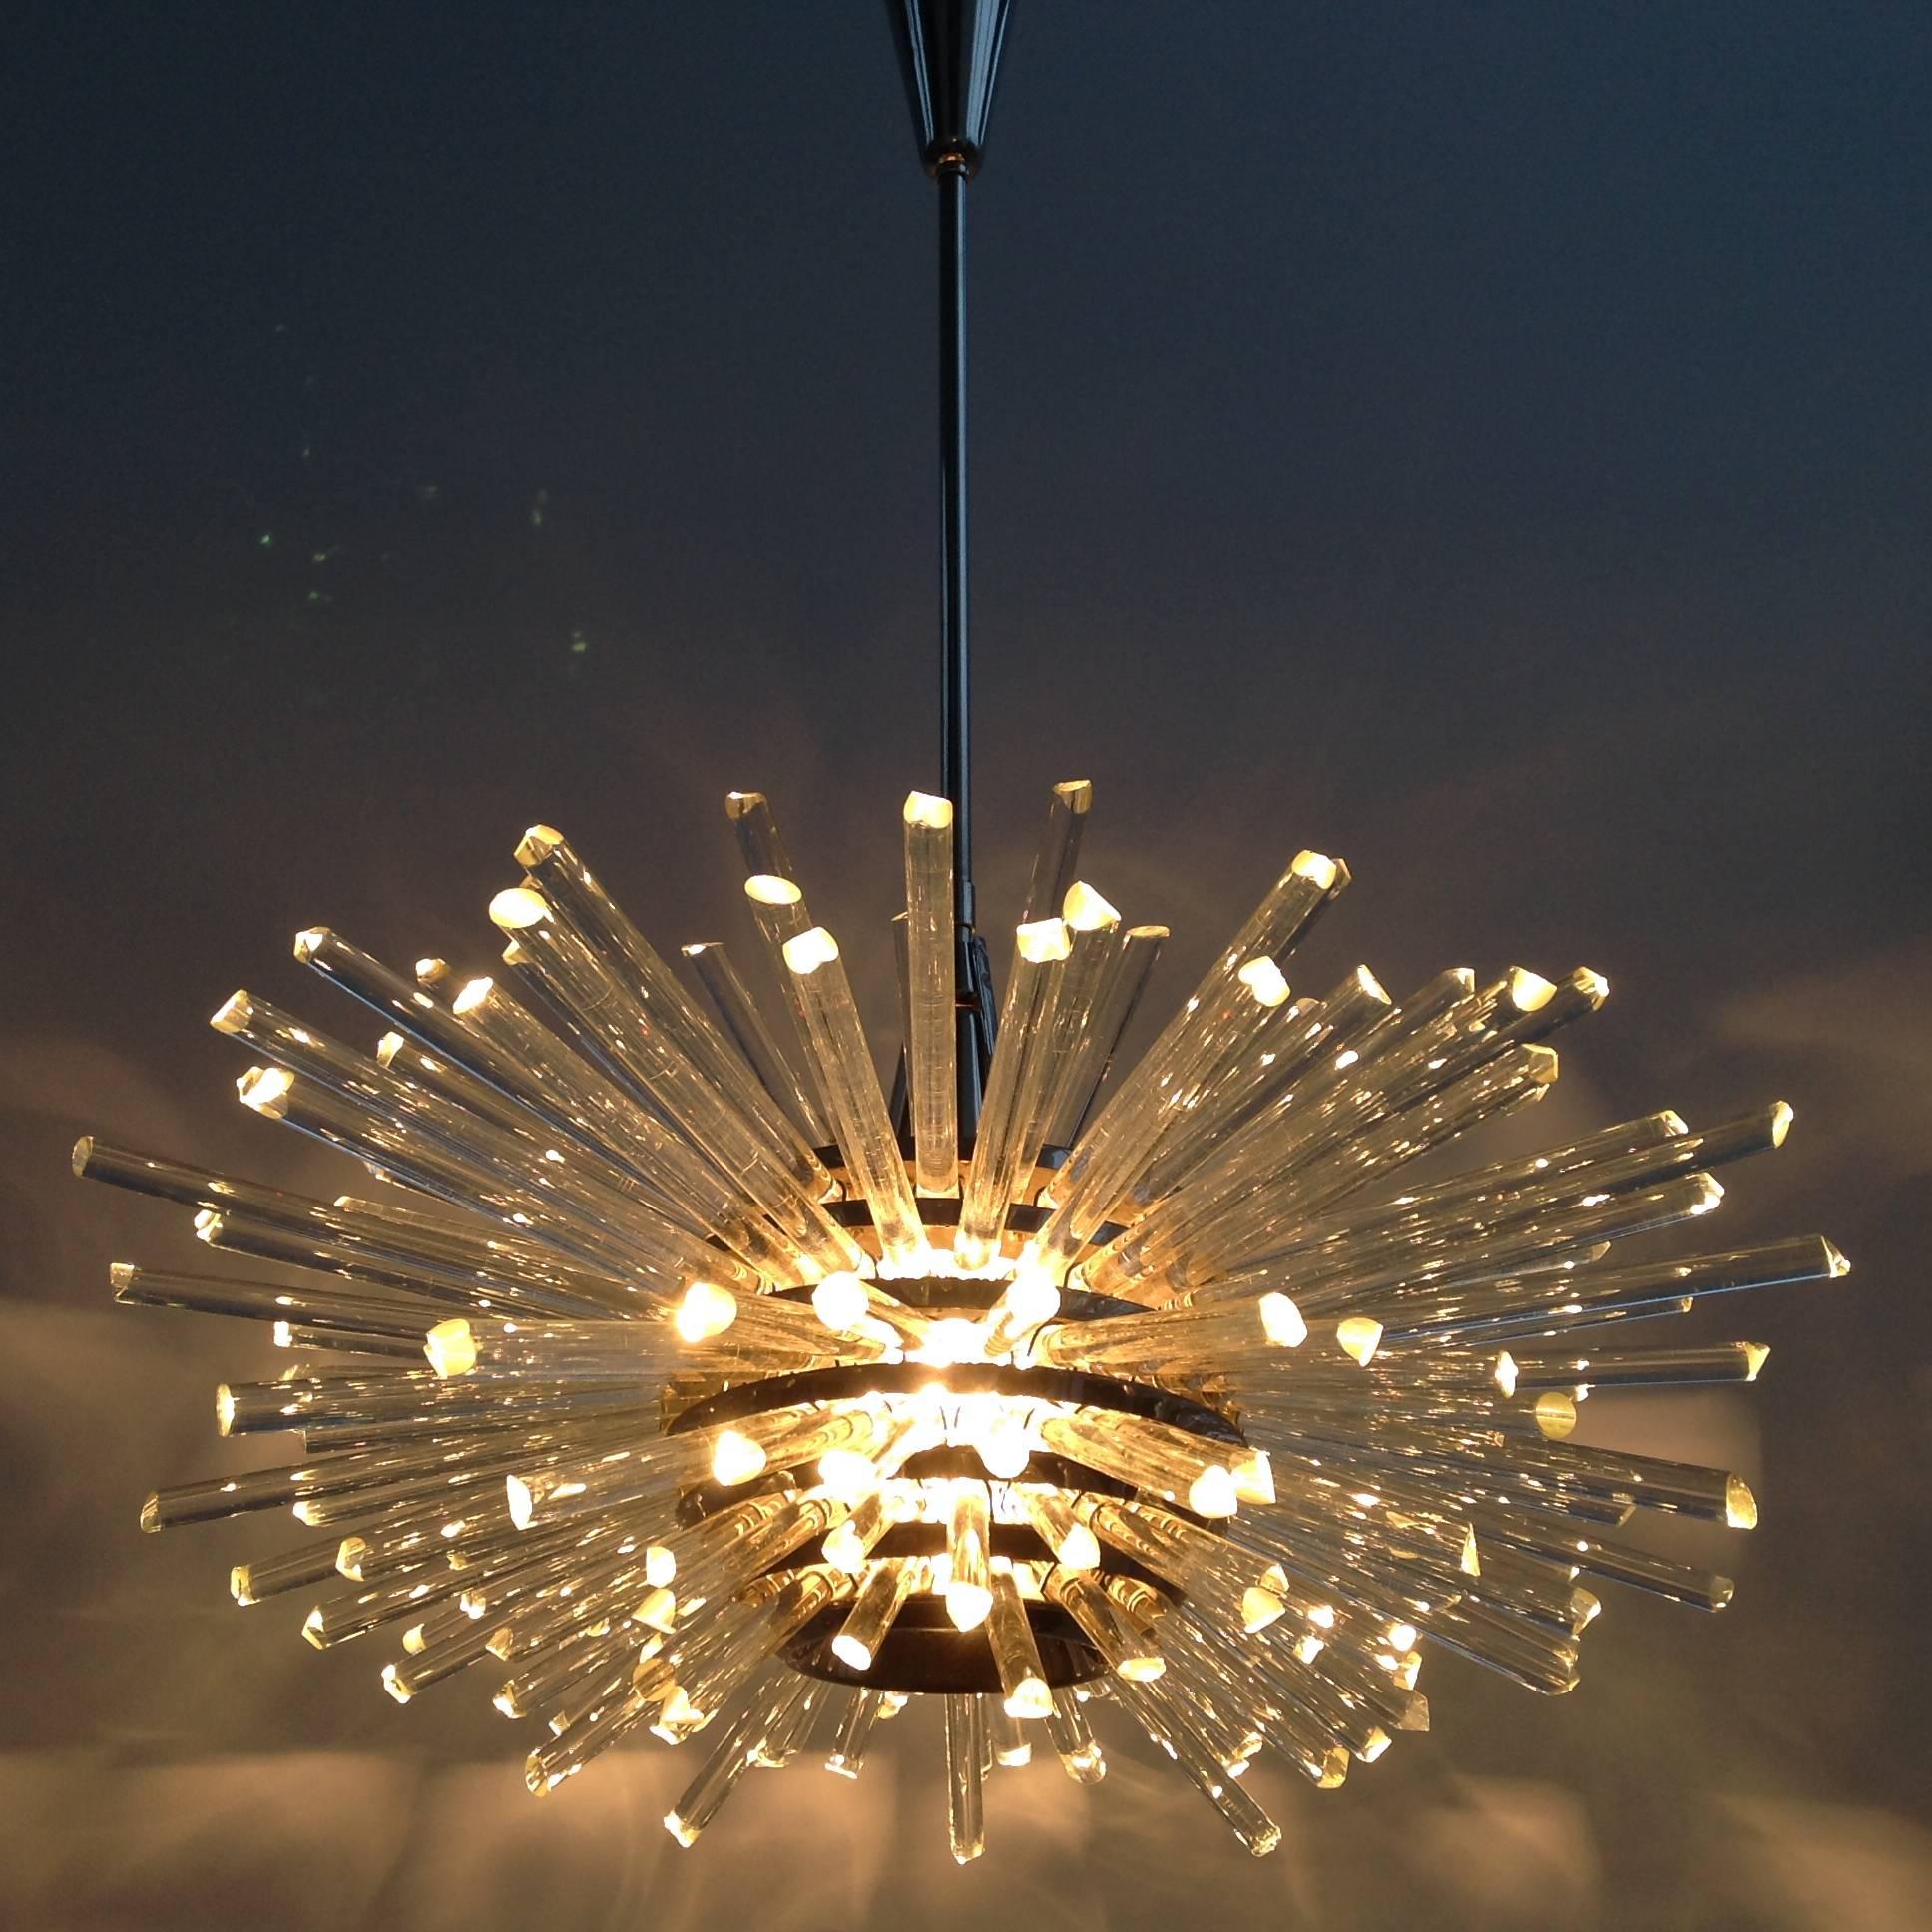 Beautiful Austrian midcentury chandelier model Miracle was designed by Prof. Friedl Bakalowits and made by his company Bakalowits & Söhne, Vienna, Austria in the 1960s. This first edition is the nickel-plated version, with clear crystal glass rods.